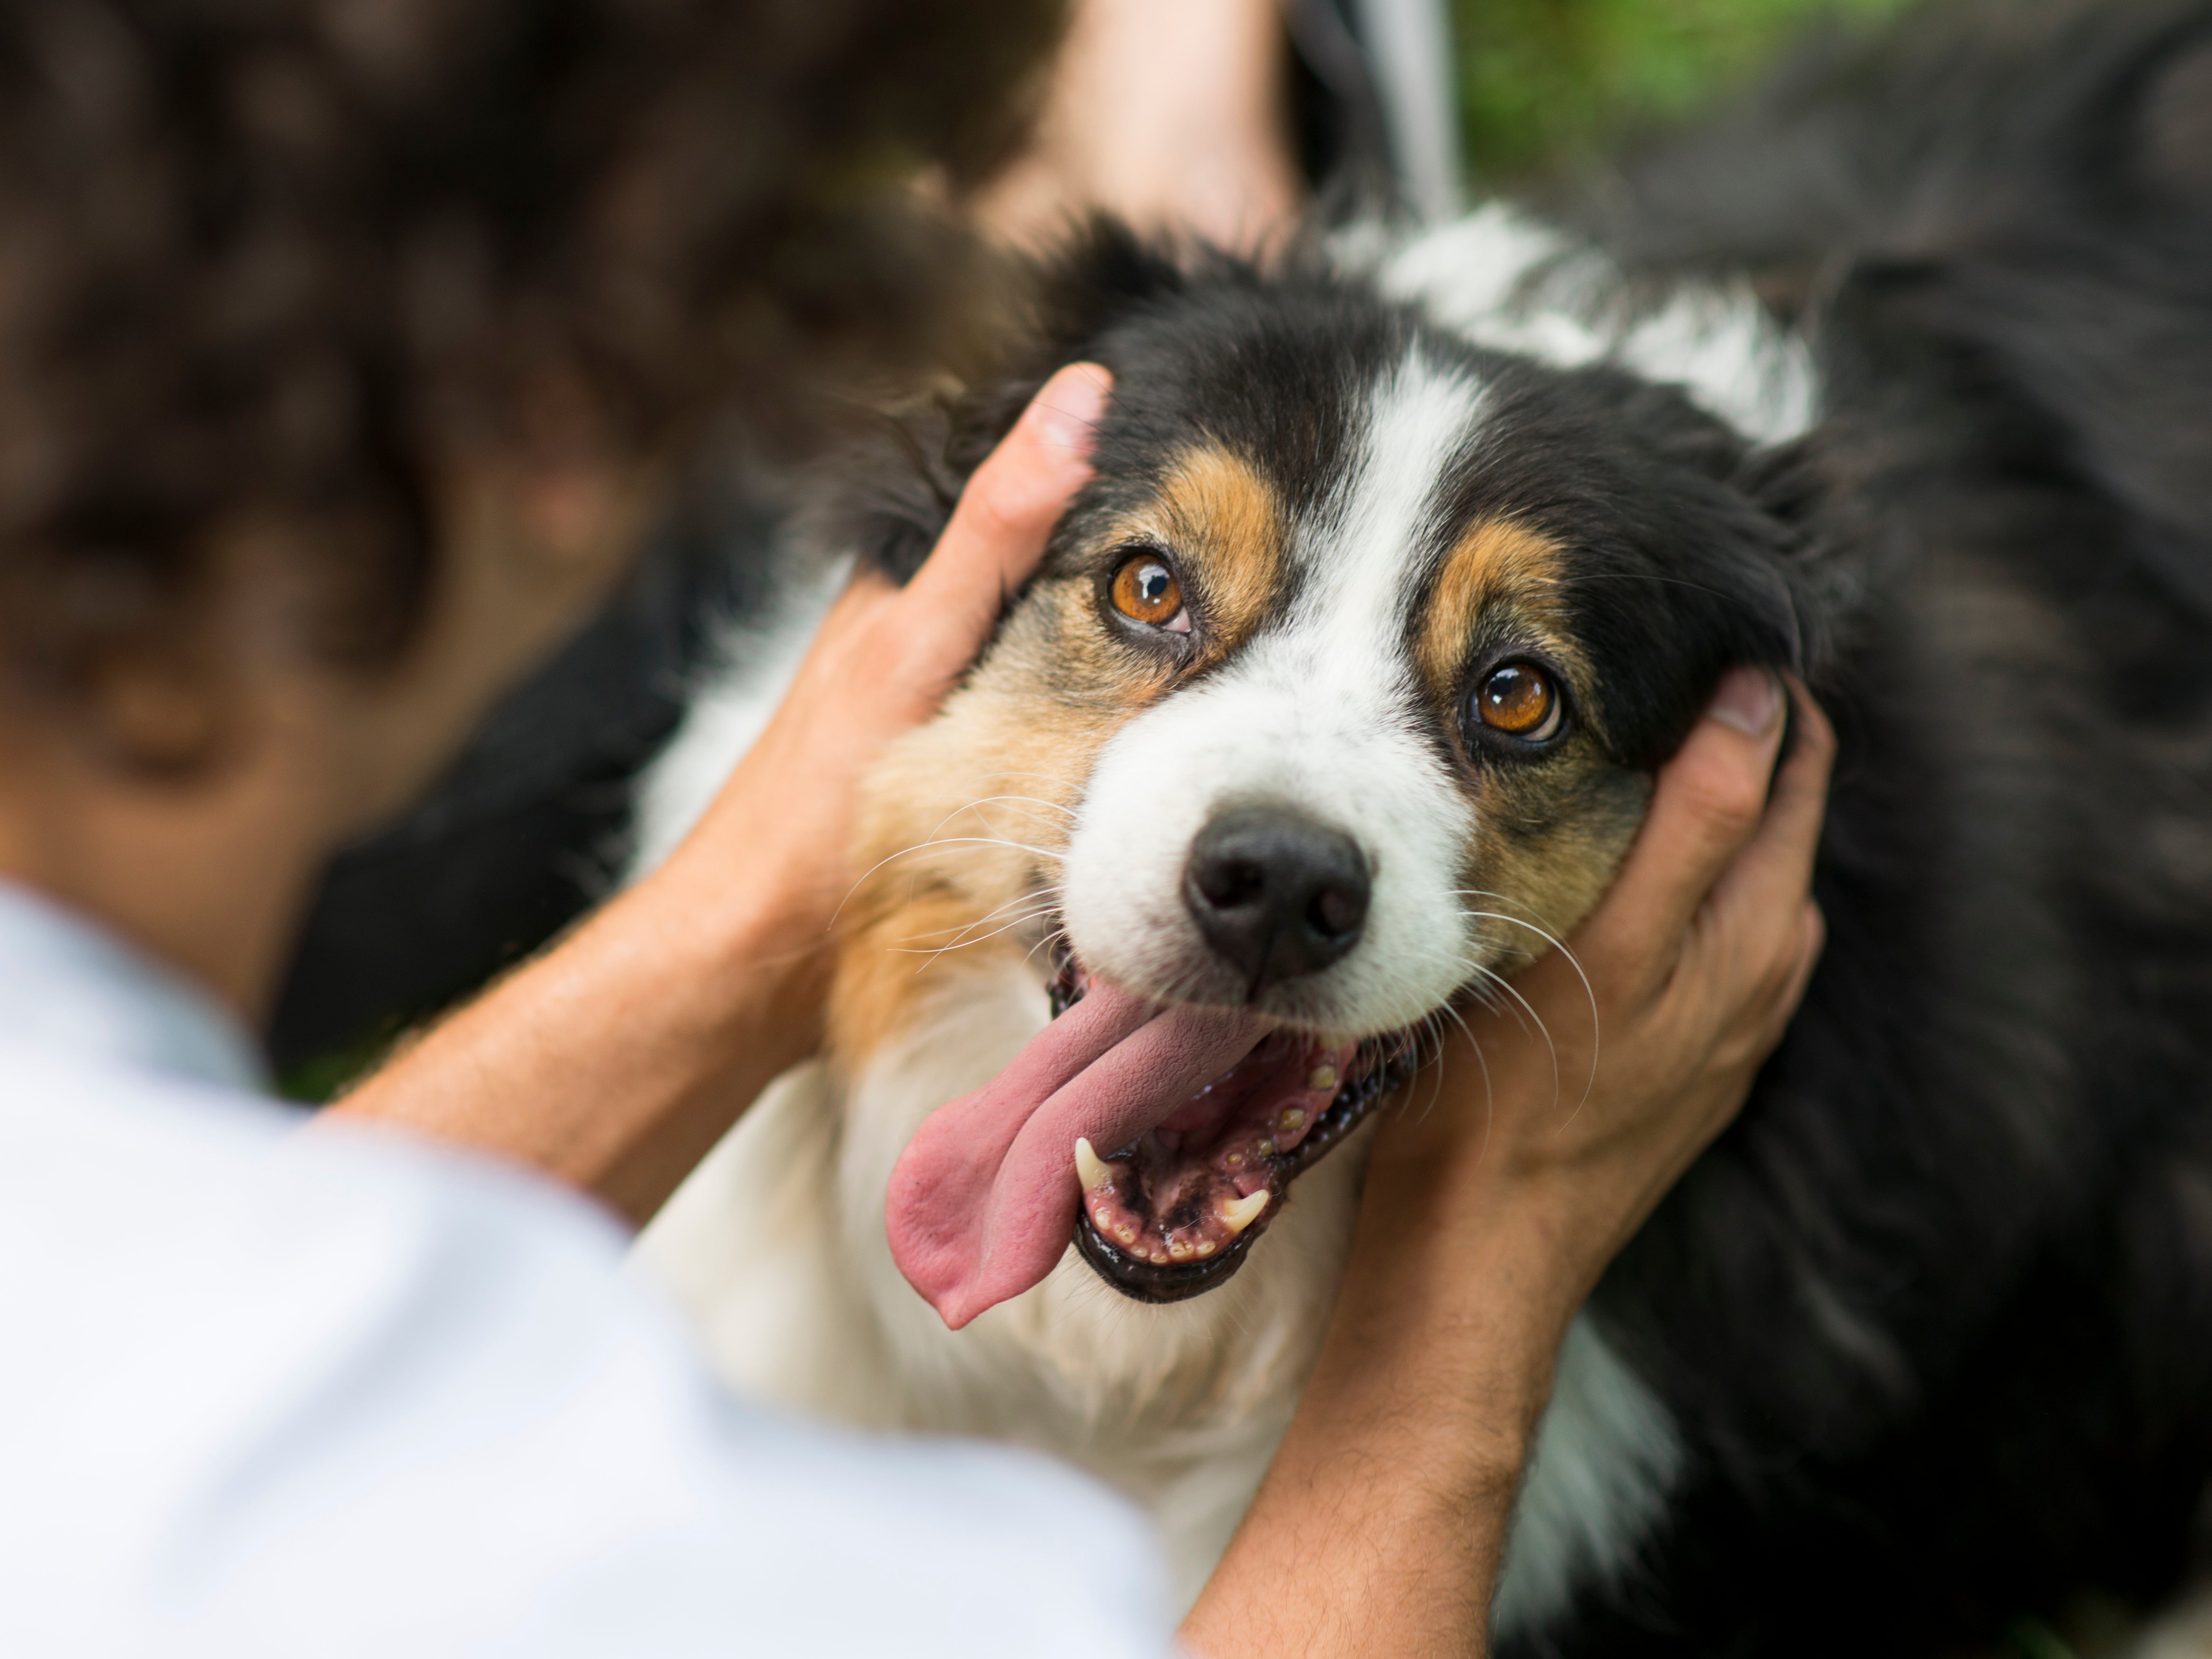 A study by scientists at the University of Liverpool found adult hospital admissions for dog bites have tripled in England in the last 20 years.